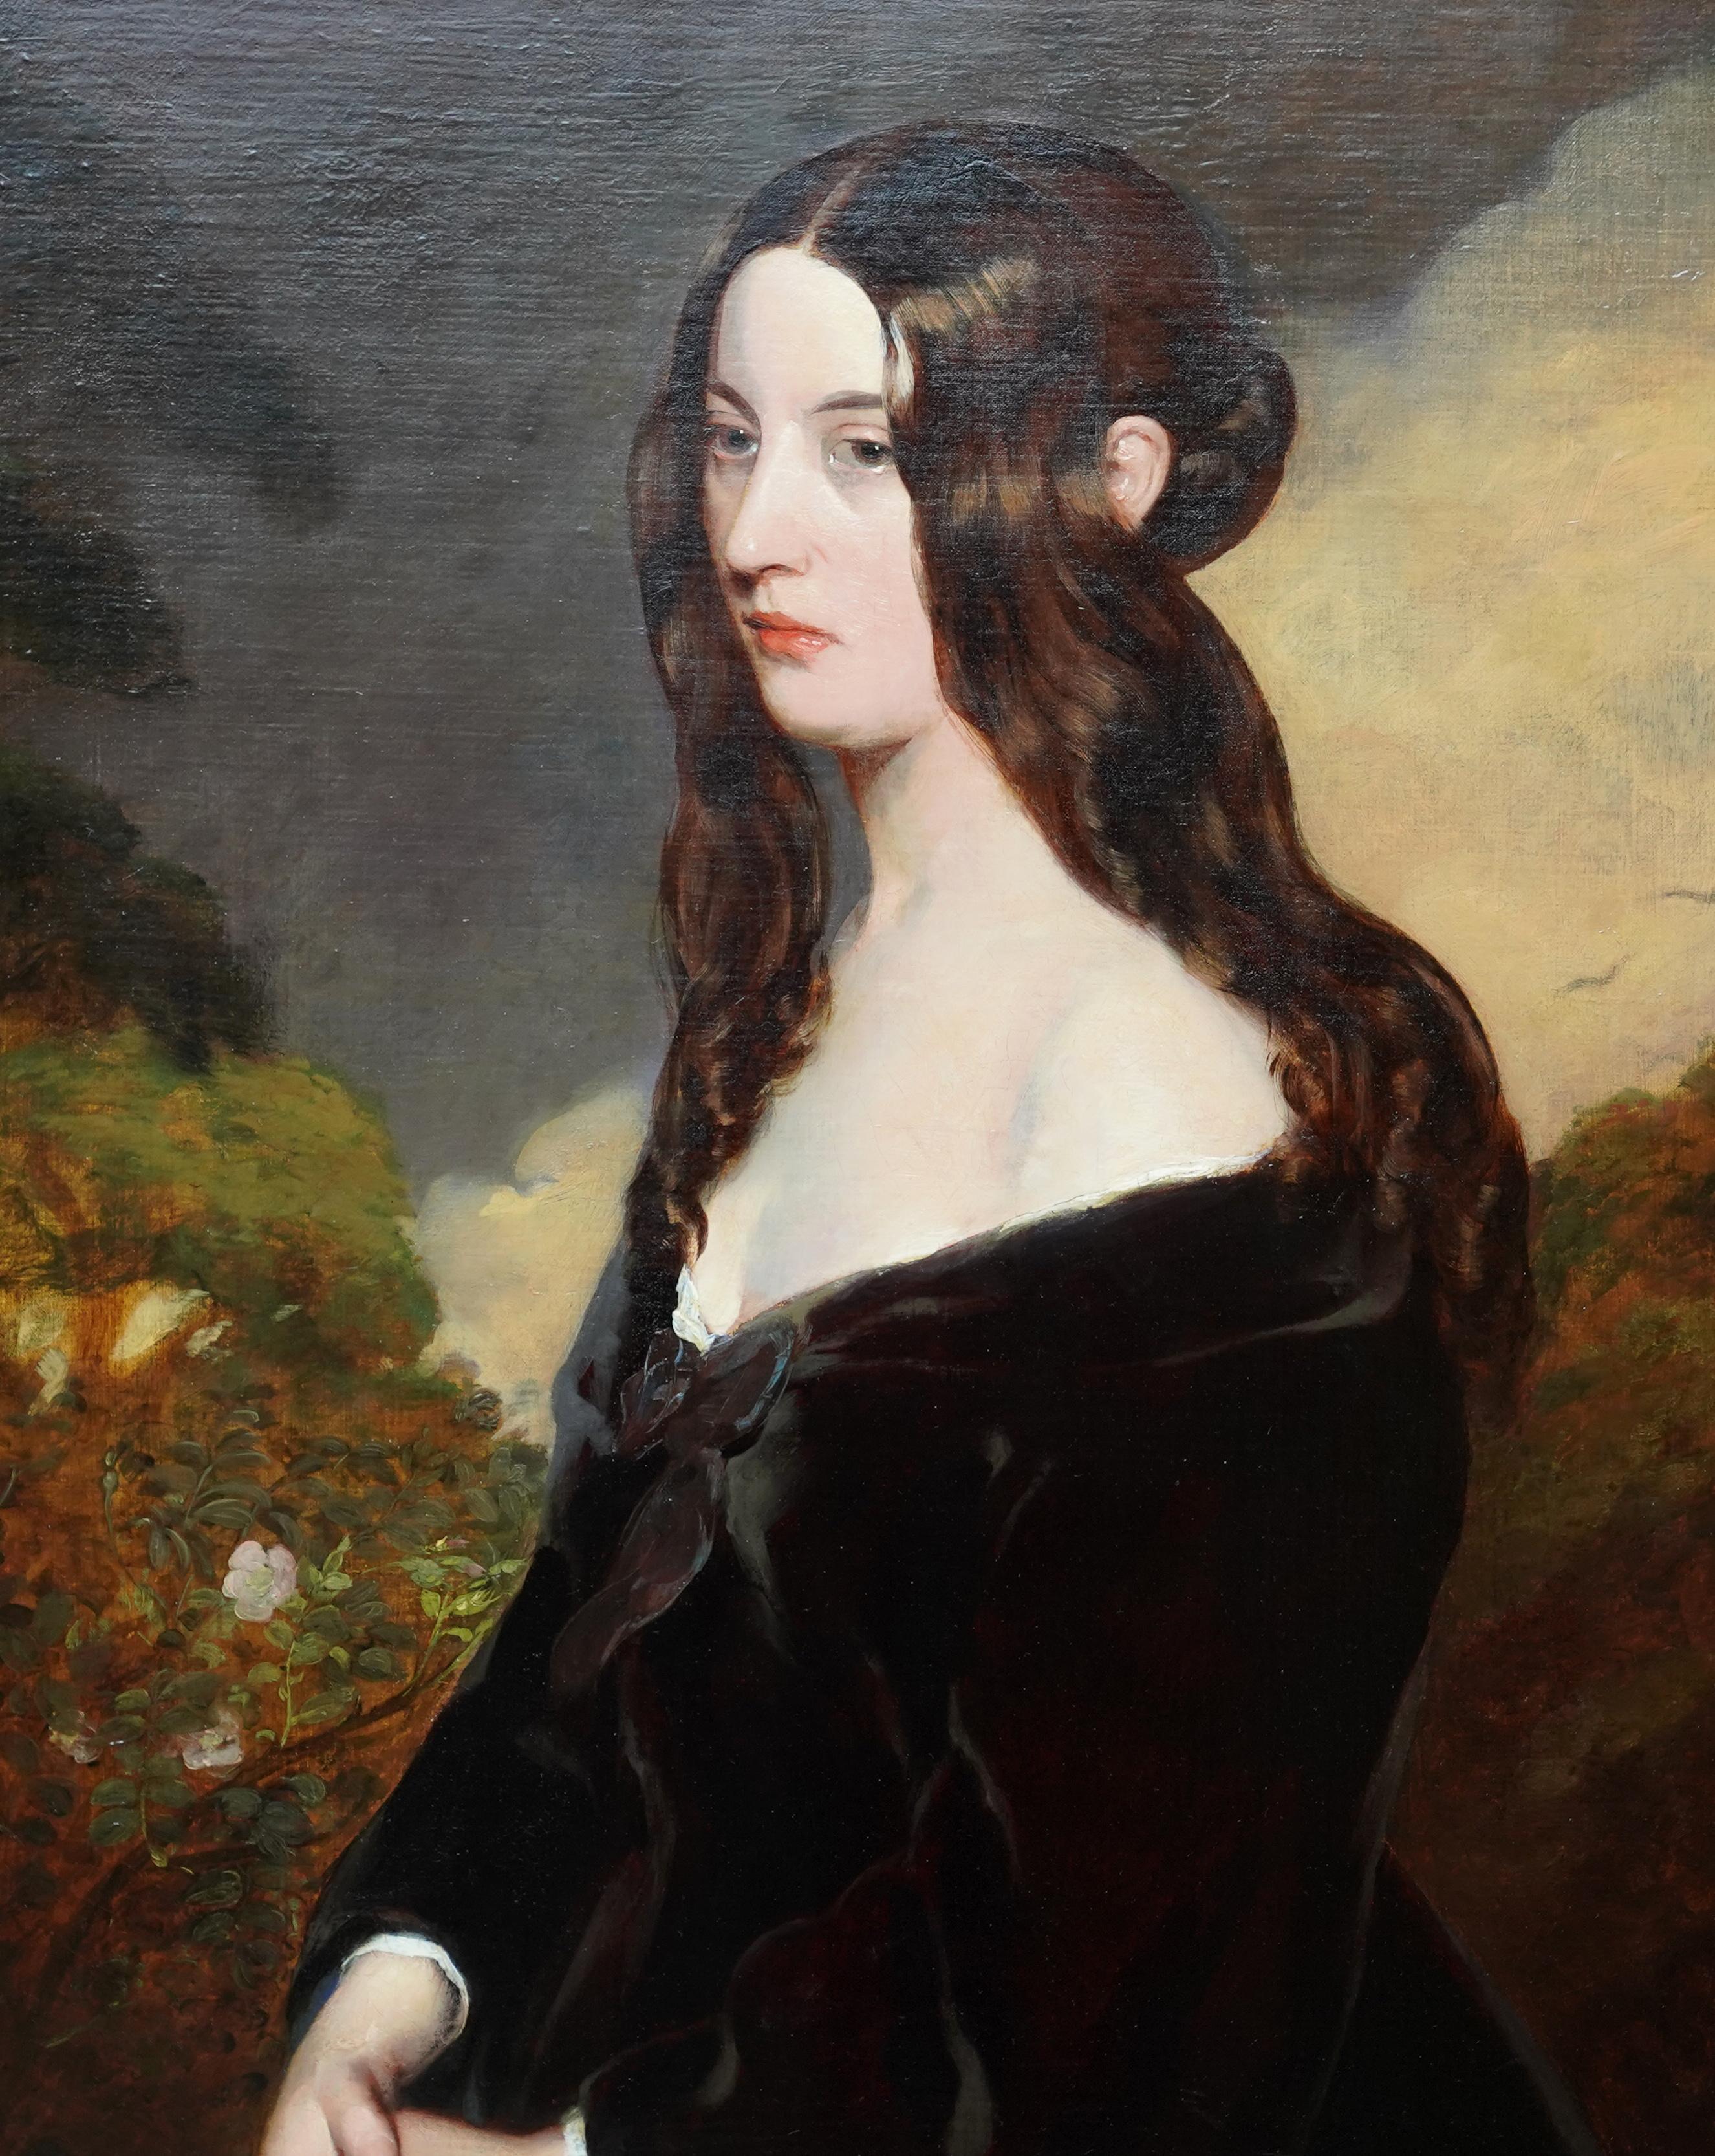 This stunning Scottish Old Master portrait oil painting is attributed to noted Scottish artist Andrew Geddes. Painted circa 1830 it is a half-length portrait of a young woman in a landscape and painted with wonderful rich tones and superb brushwork.